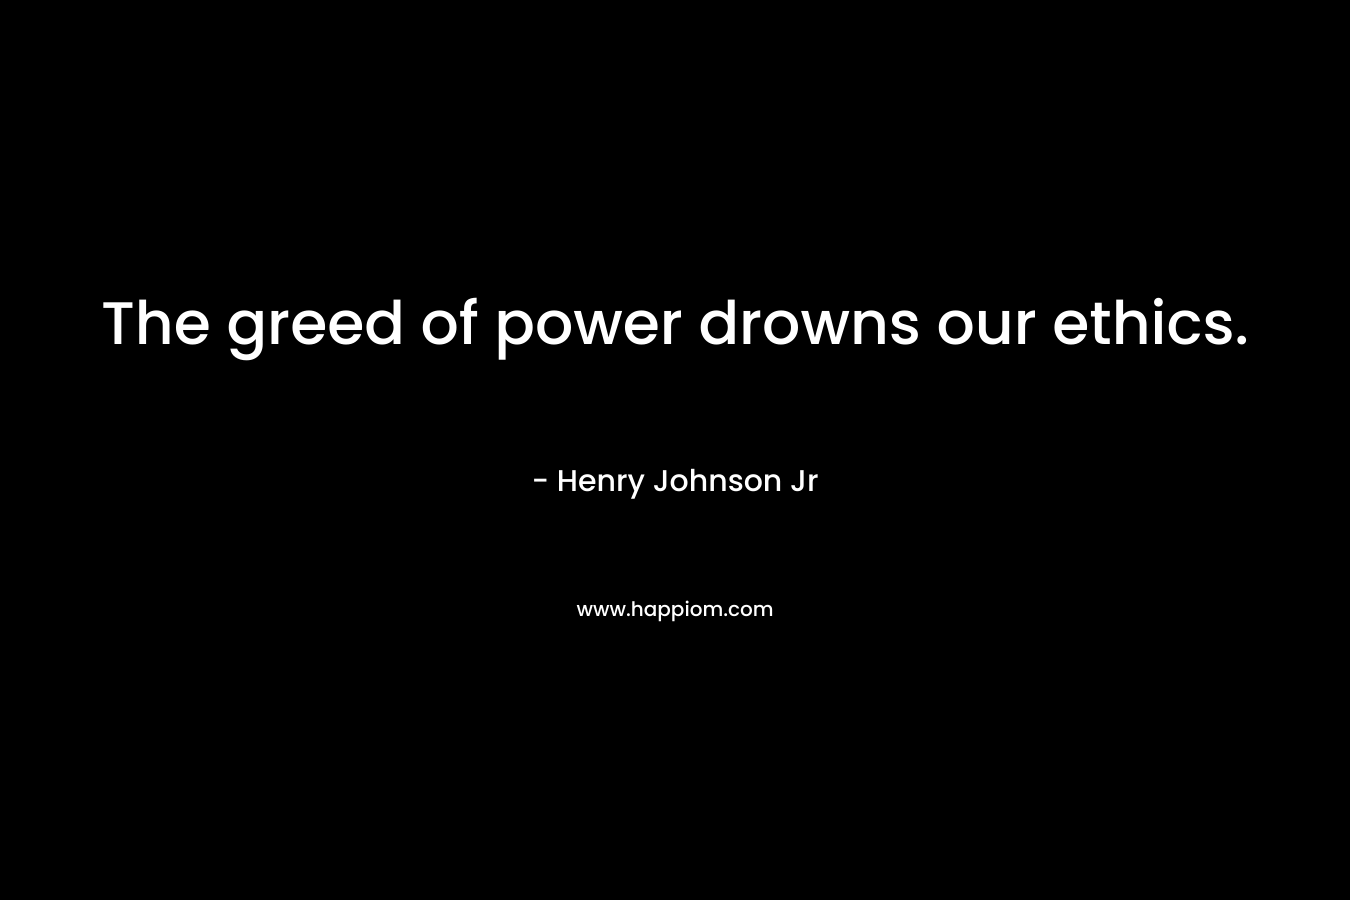 The greed of power drowns our ethics. – Henry Johnson Jr